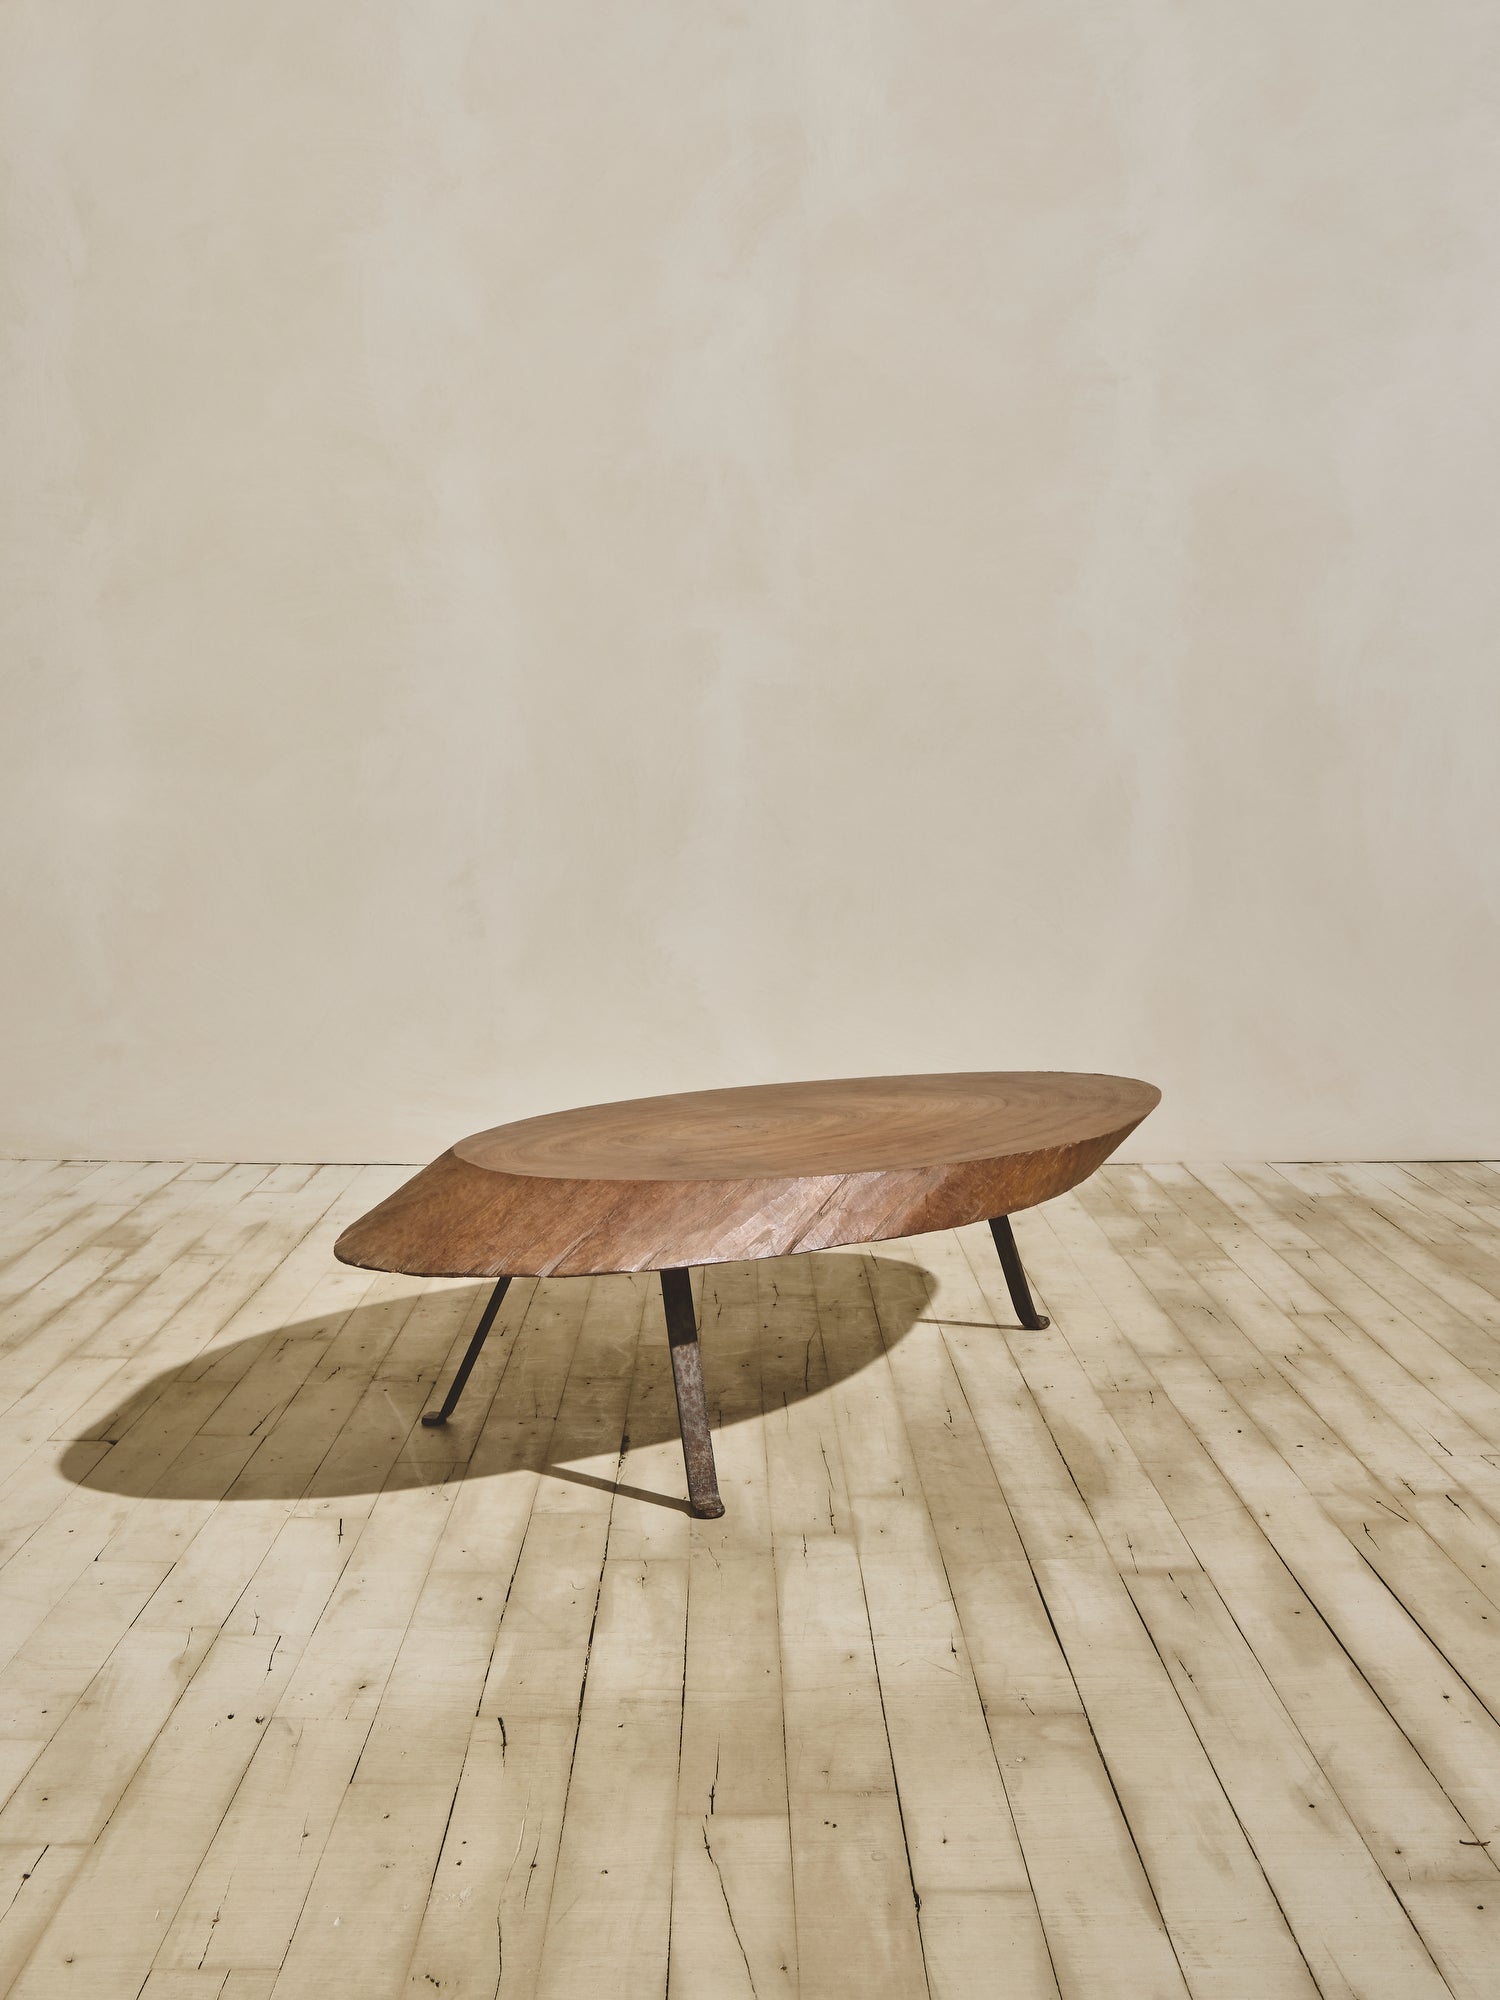 Medium brown stain oval ambiance coffee table with a thick chamfered, live-edge top and forged metal cabriole legs